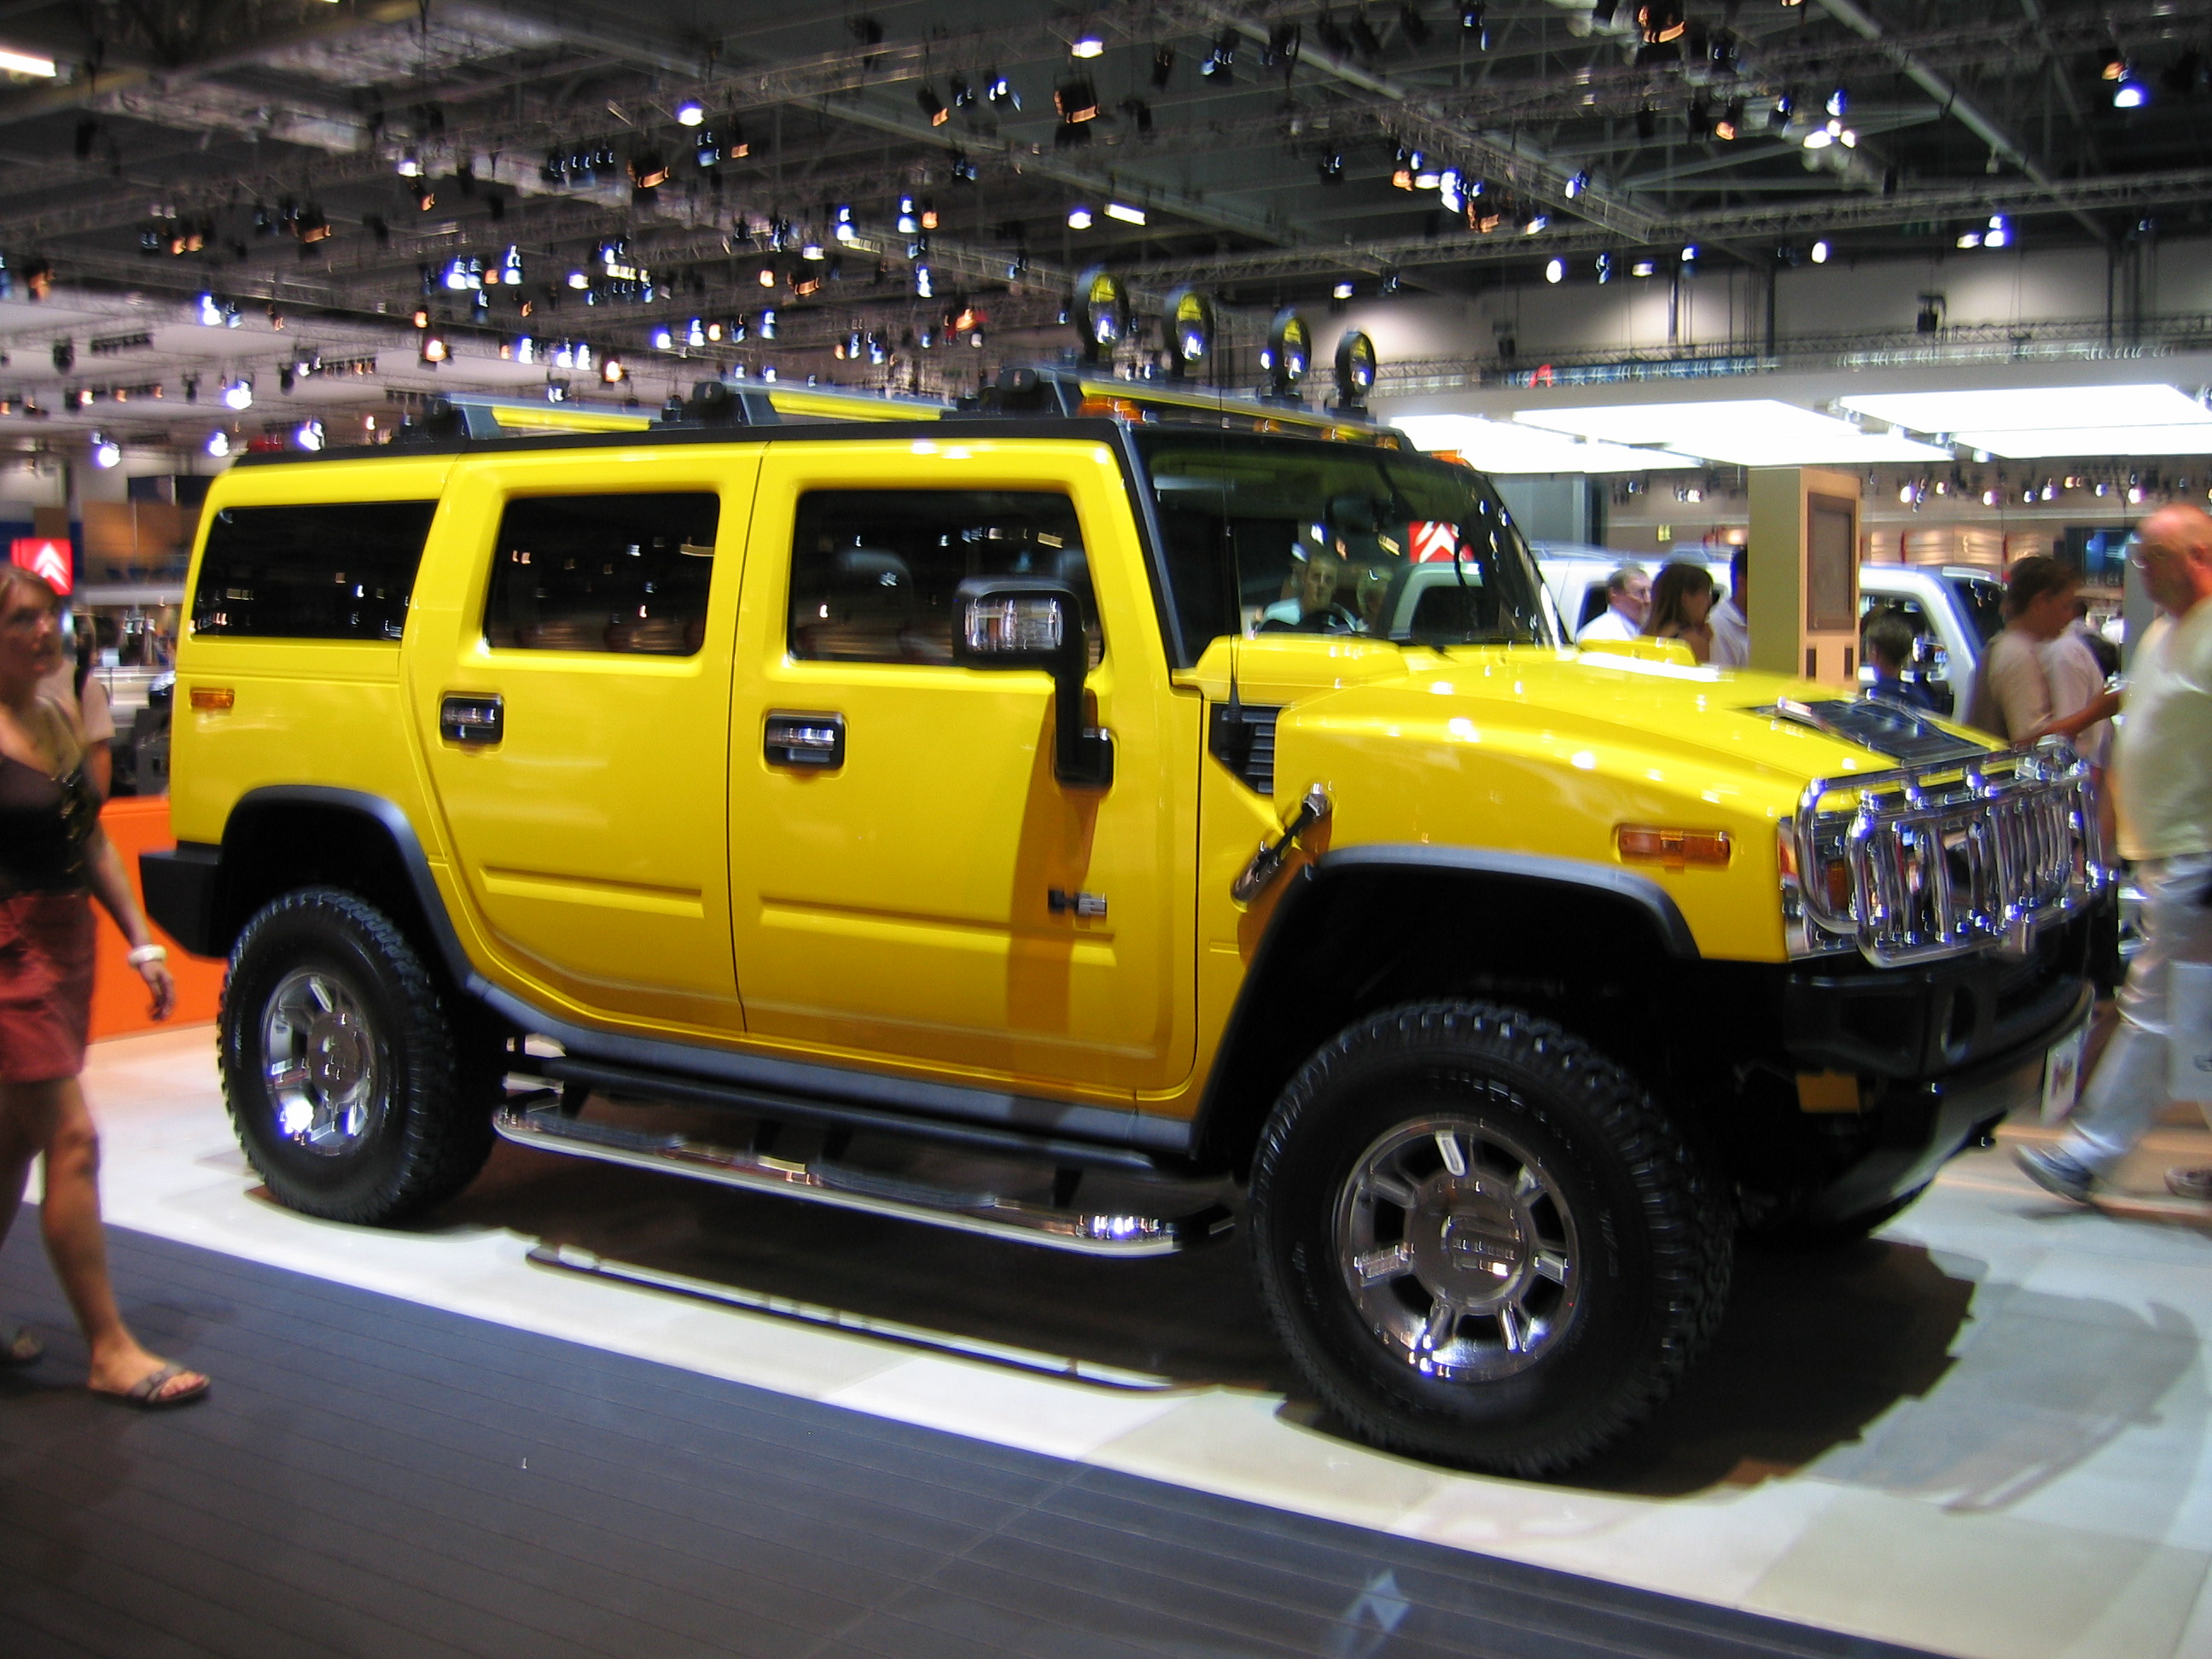 Hummer sales fell 95% between 2006 and 2010.